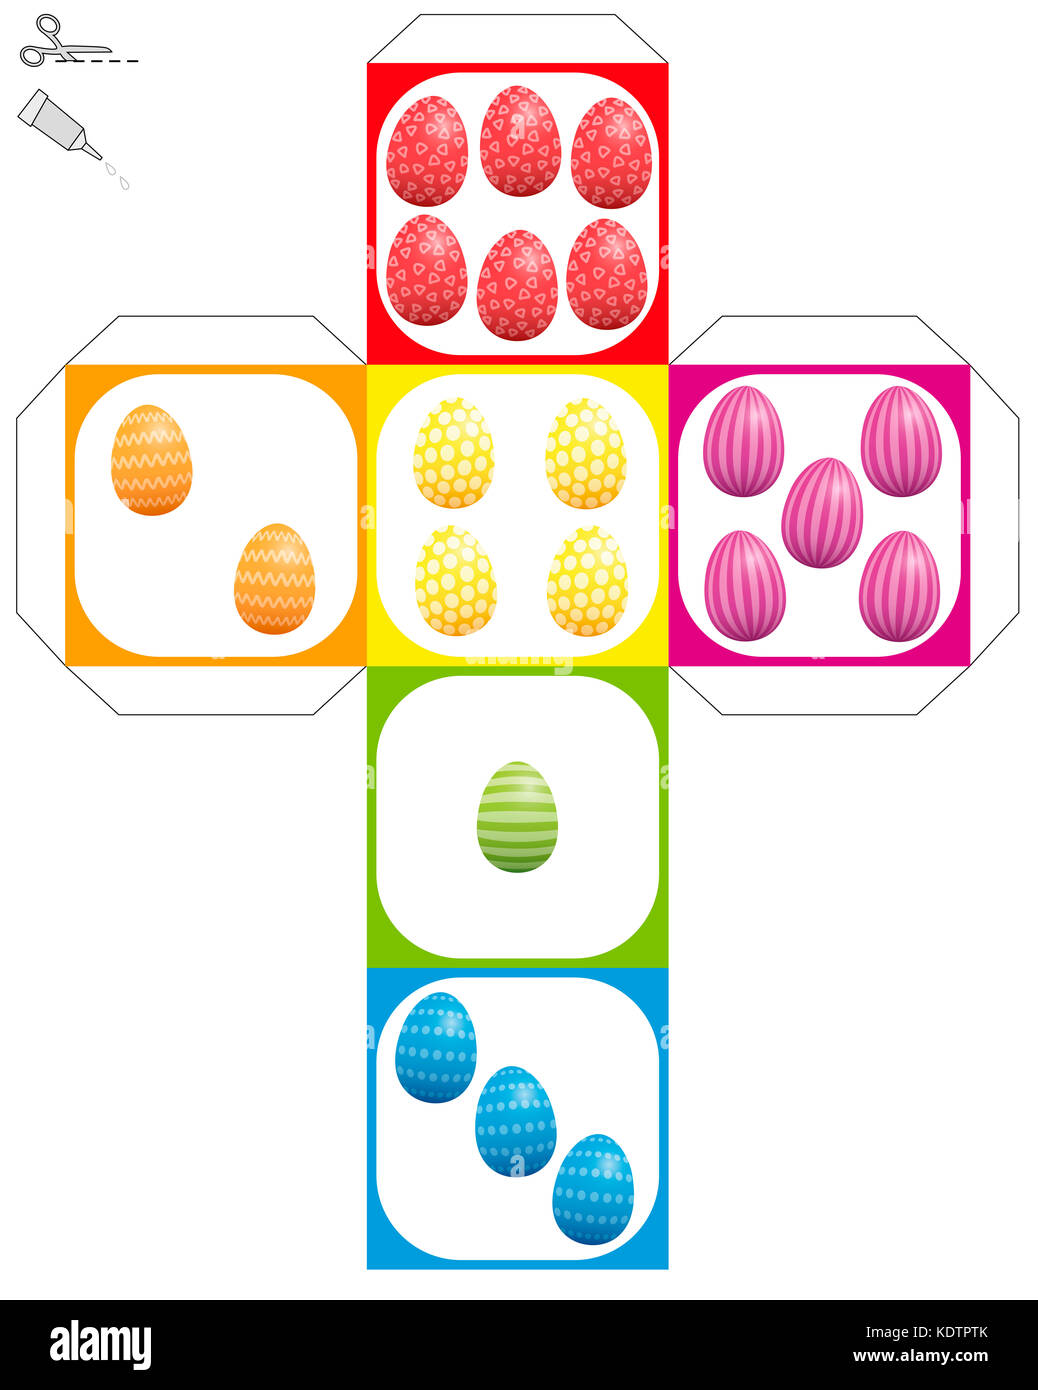 easter egg dice template do it yourself model of a cube with colored and patterned easter eggs instead of dice eyes stock photo alamy